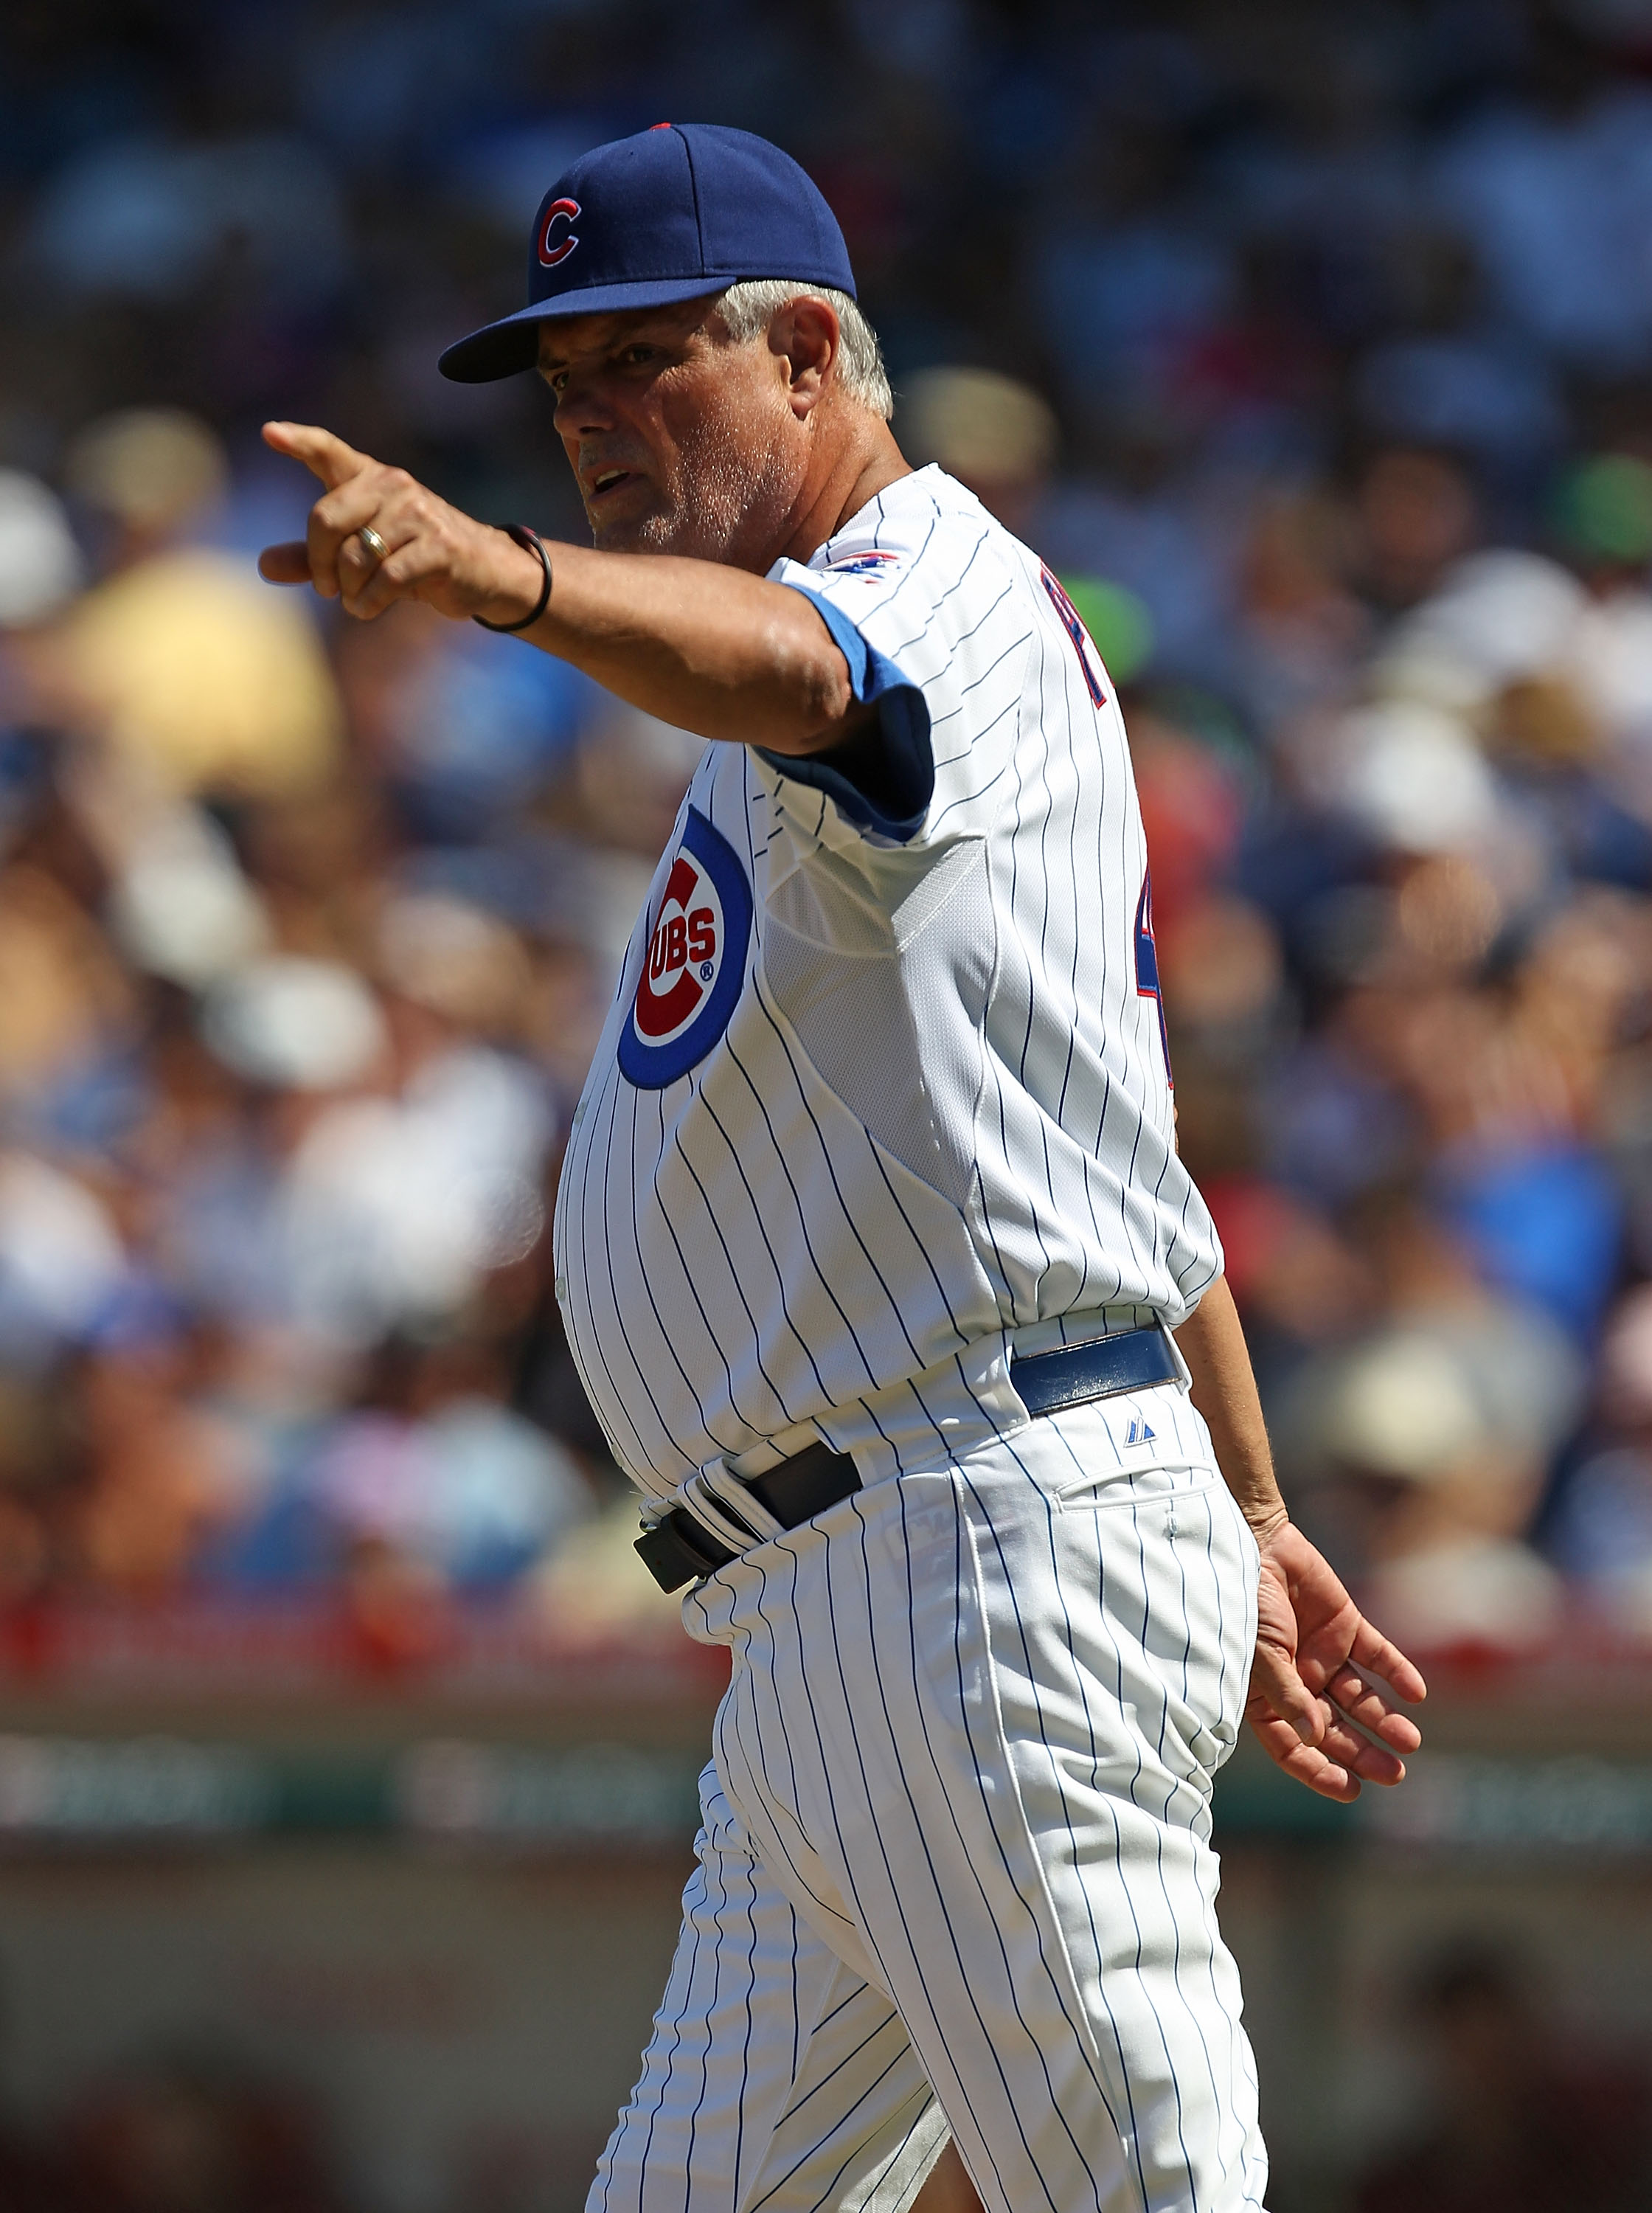 CHICAGO - JULY 21: Manager Lou Piniella #41 of the Chicago Cubs calls for a new pitcher during a game against the Houston Astros at Wrigley Field on July 21, 2010 in Chicago, Illinois. The Astros defeated the Cubs 4-3 in 12 innings. (Photo by Jonathan Dan